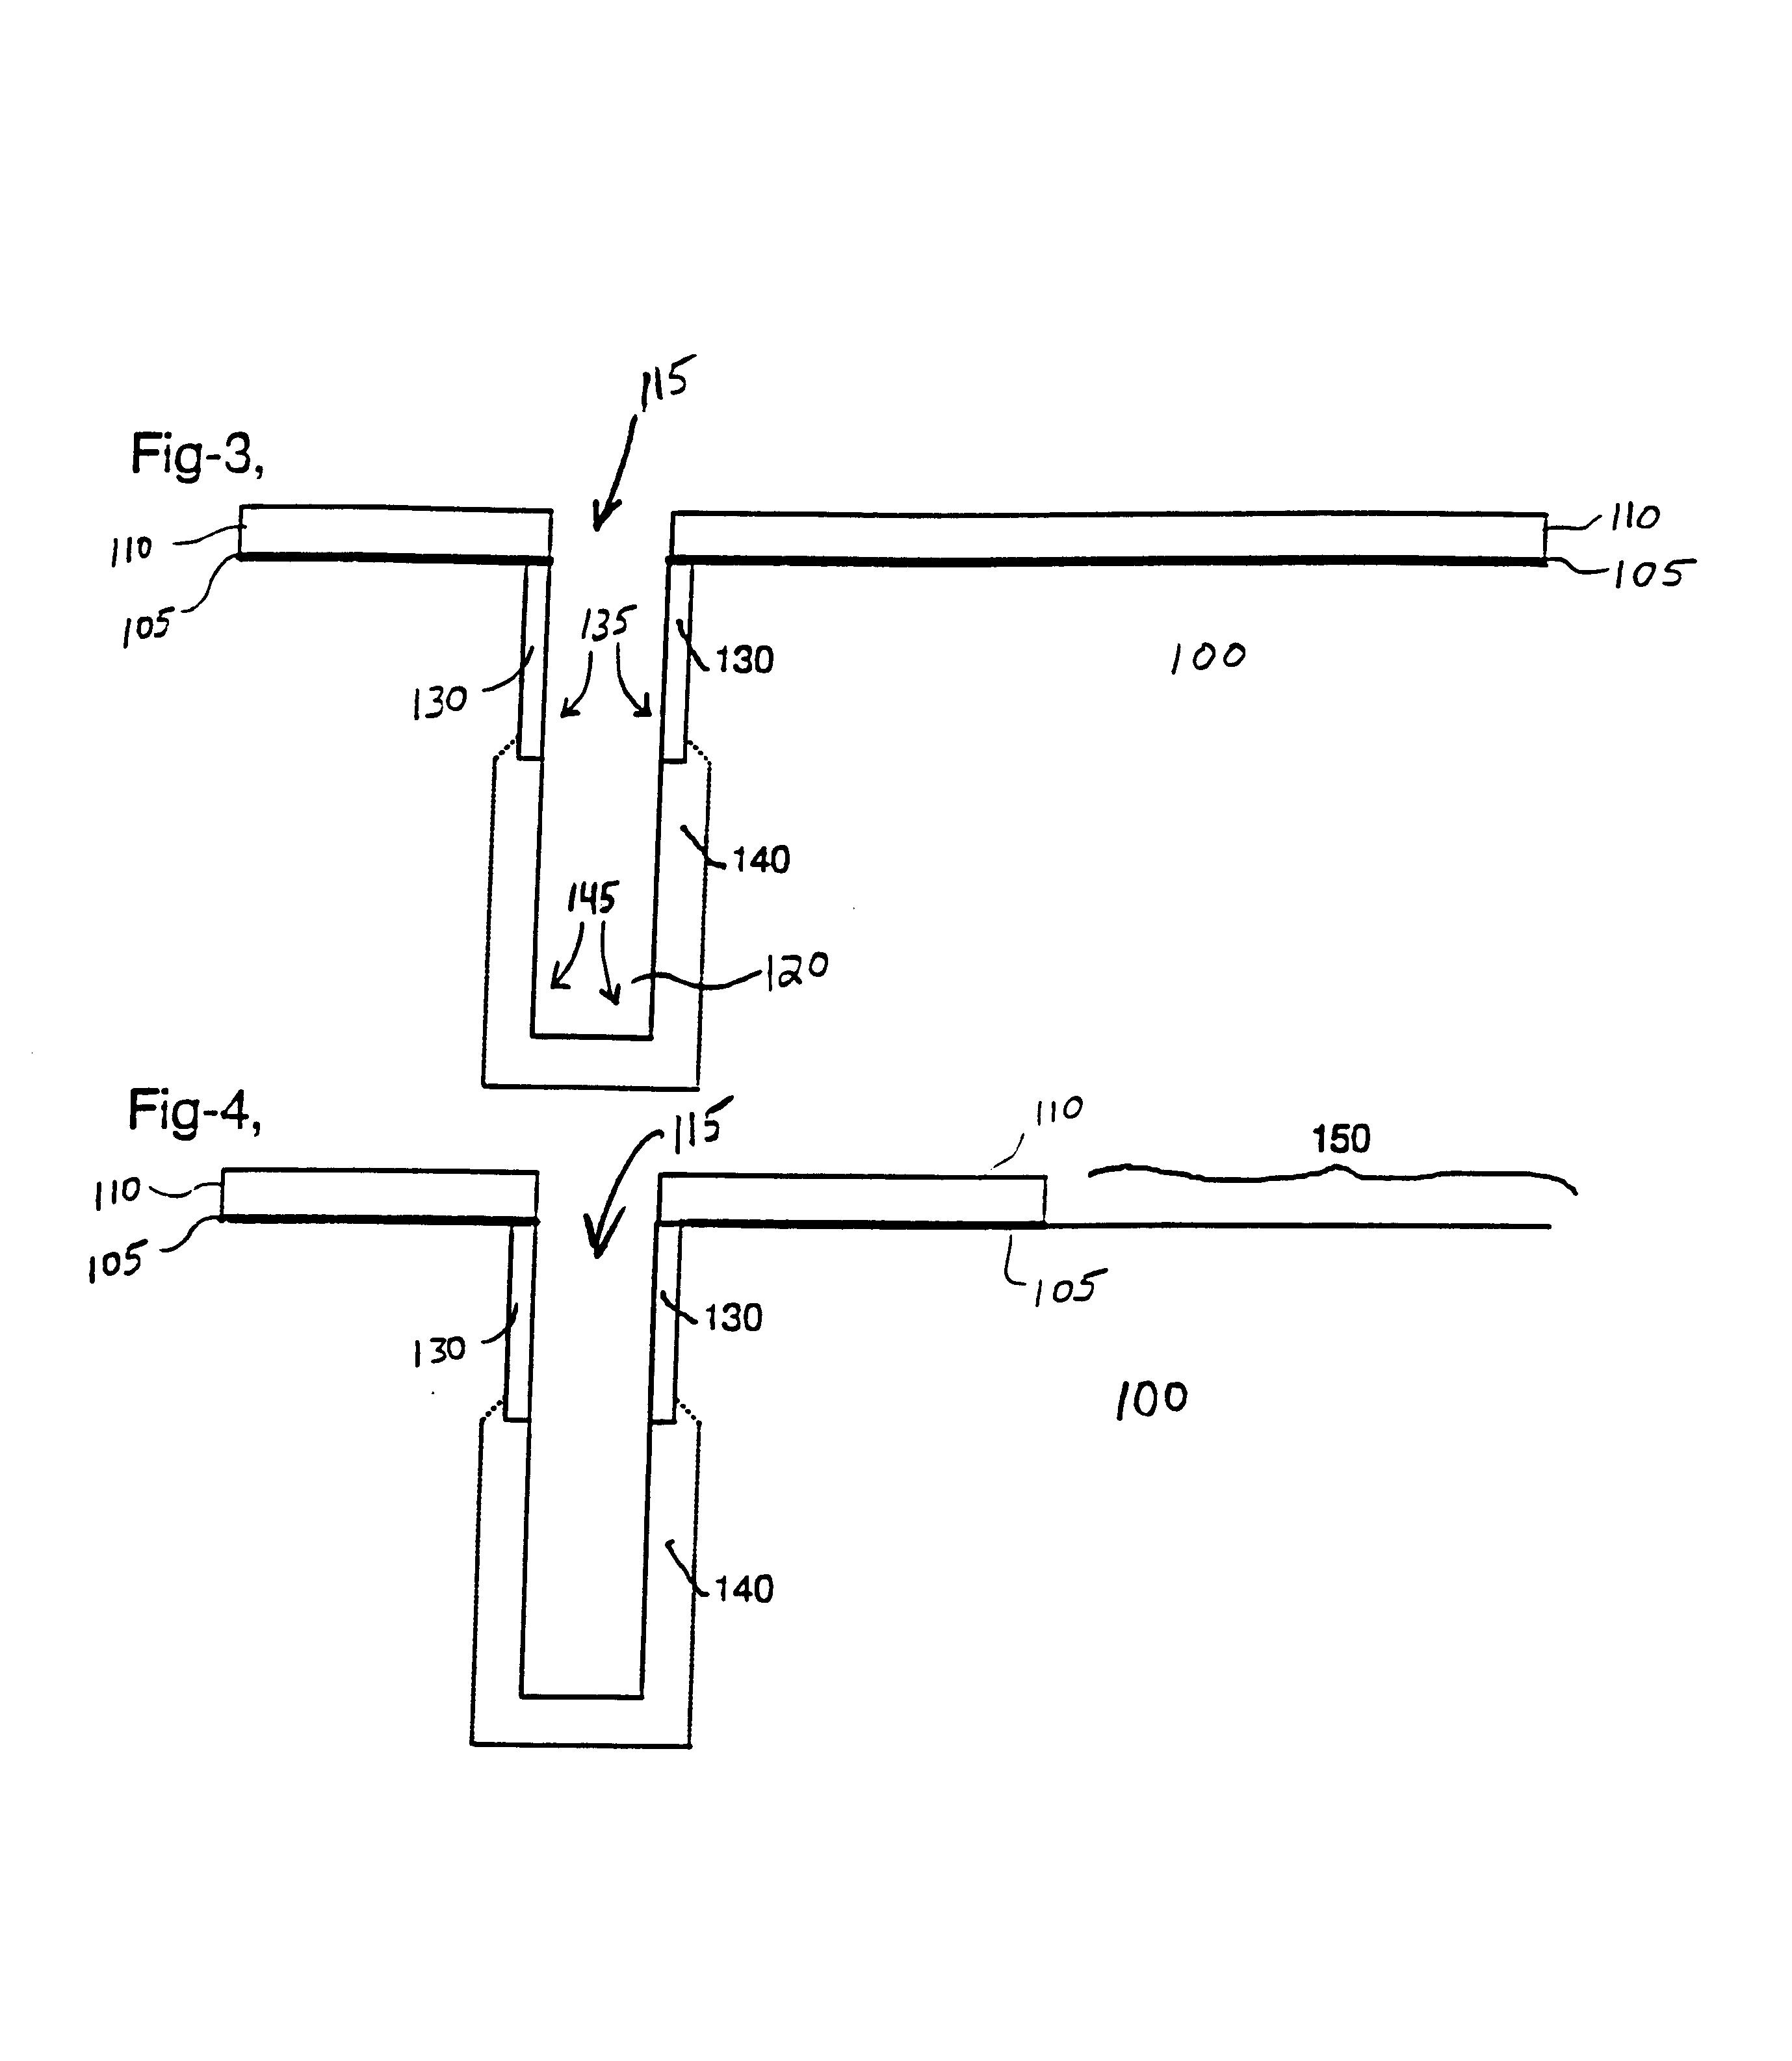 High dielectric constant materials forming components of DRAM such as deep-trench capacitors and gate dielectric (insulators) for support circuits